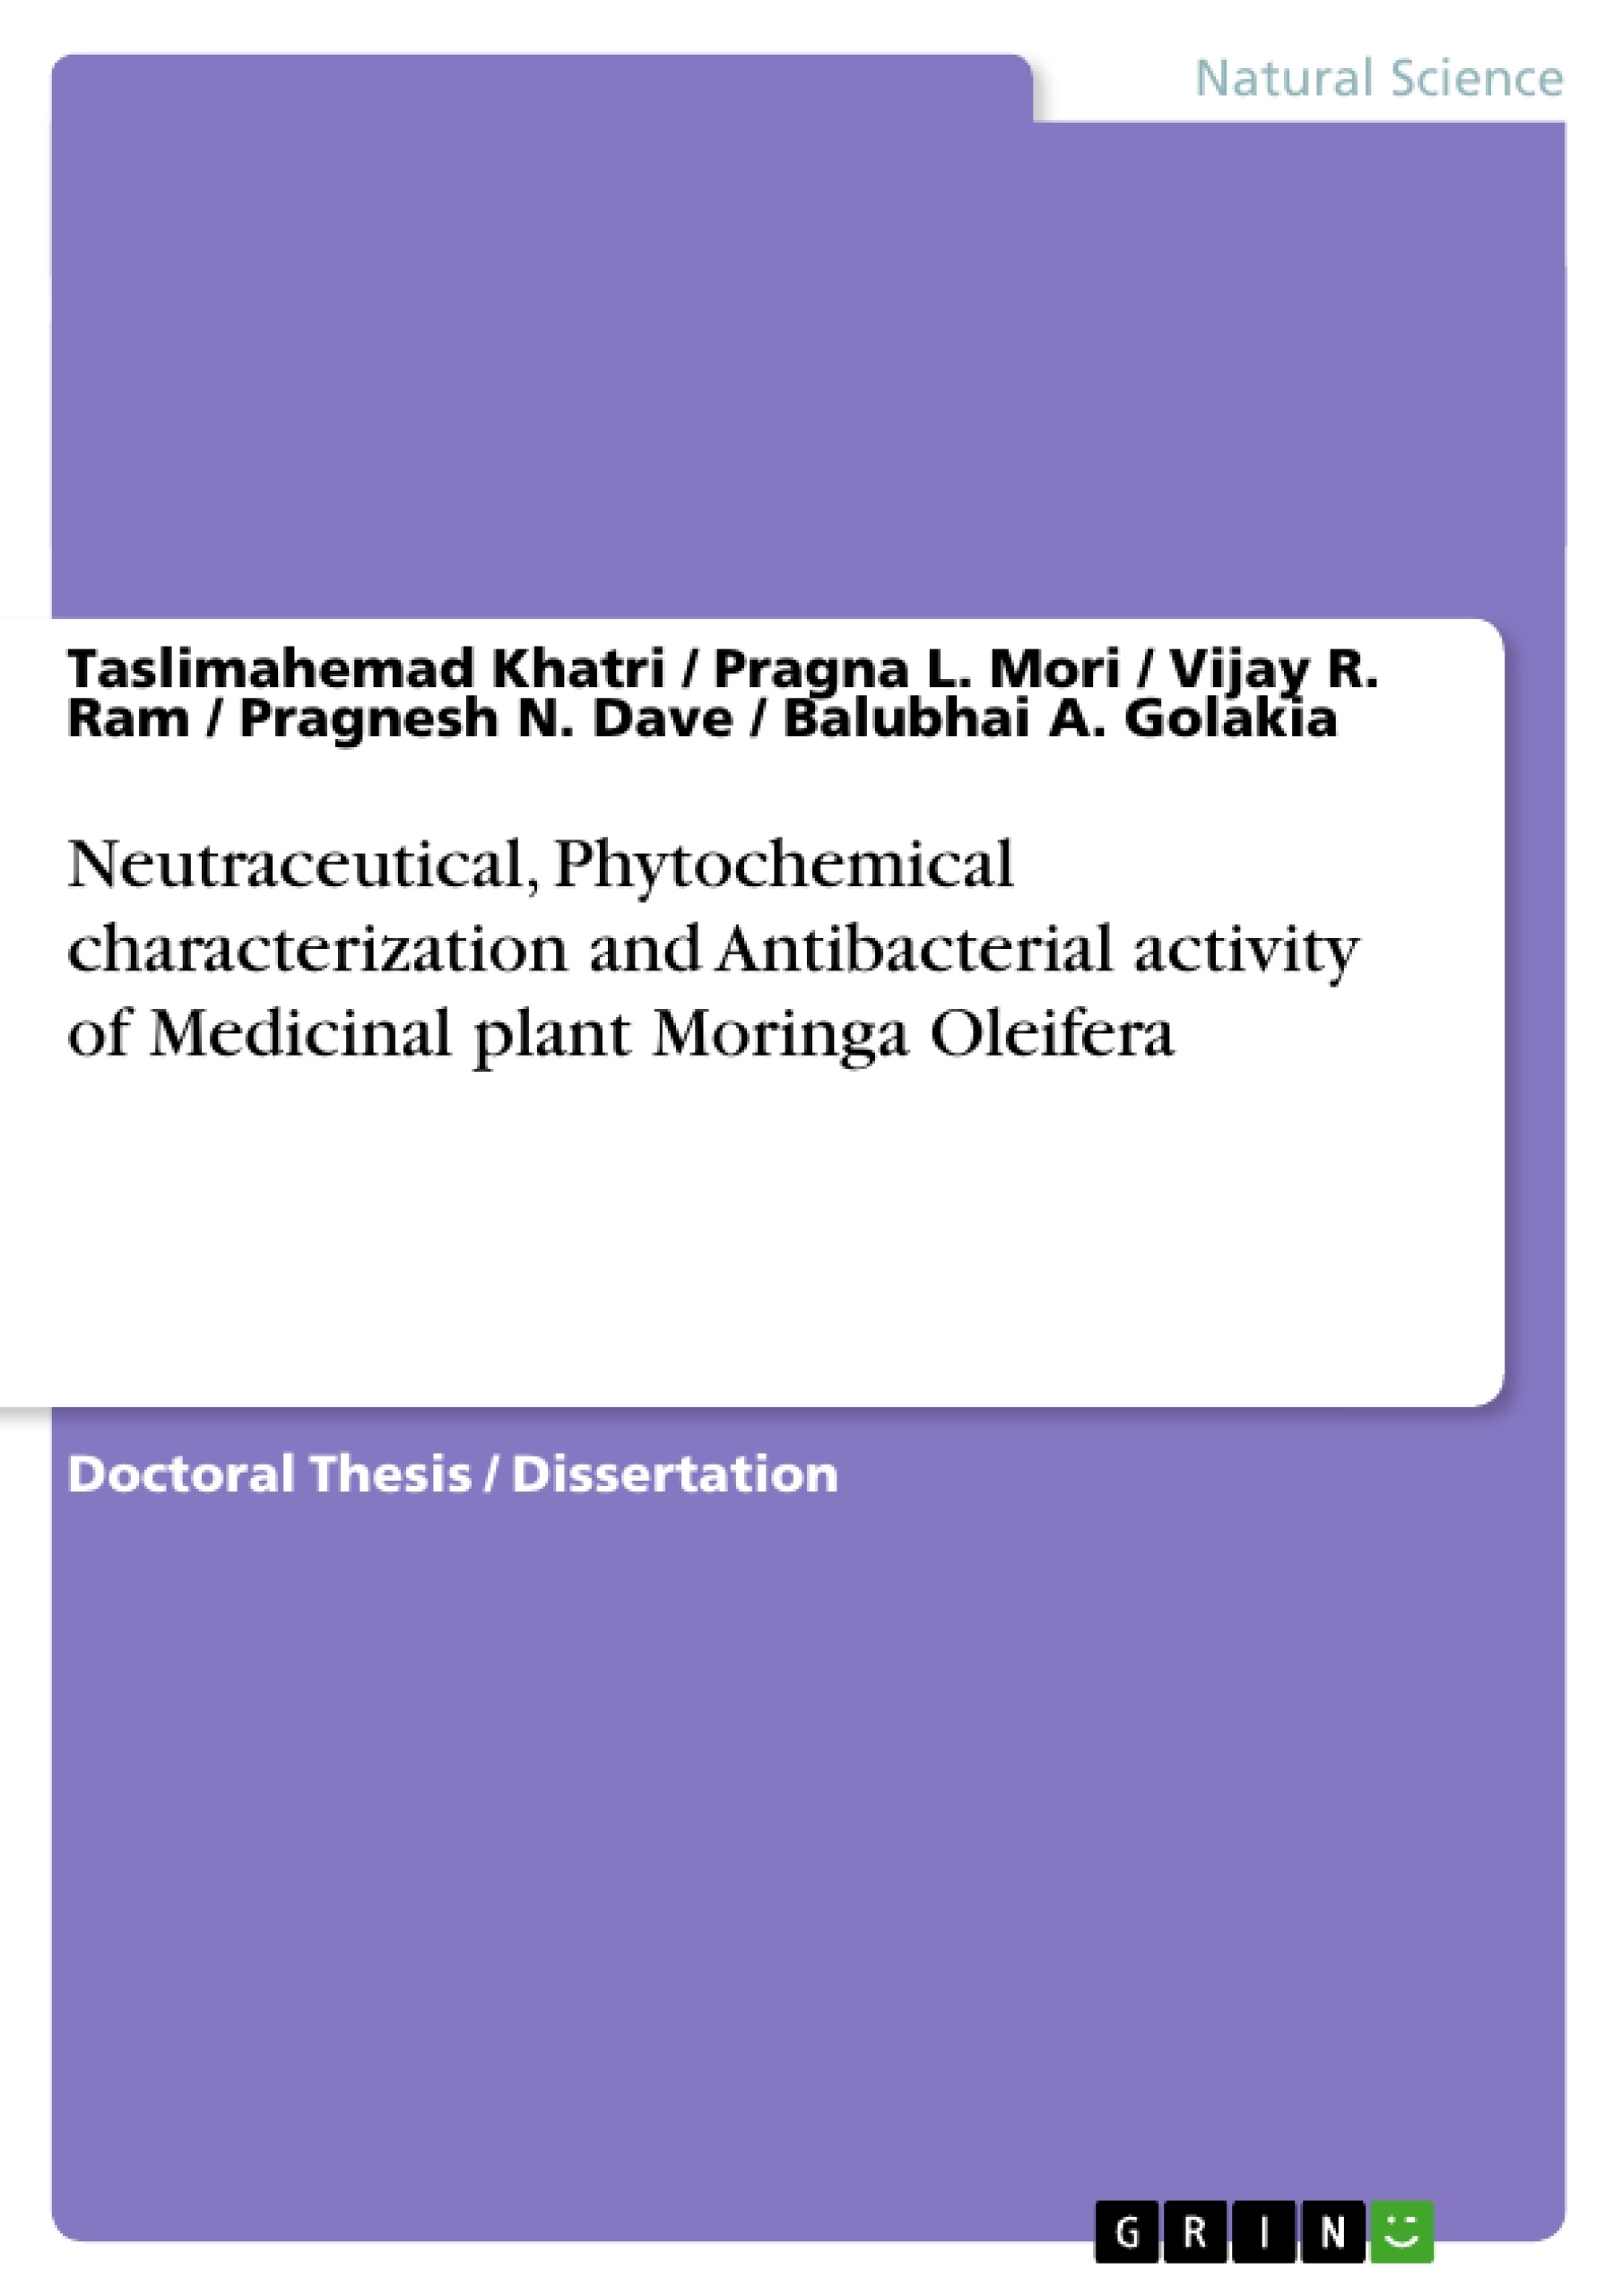 Título: Neutraceutical, Phytochemical characterization and Antibacterial activity of Medicinal plant Moringa Oleifera